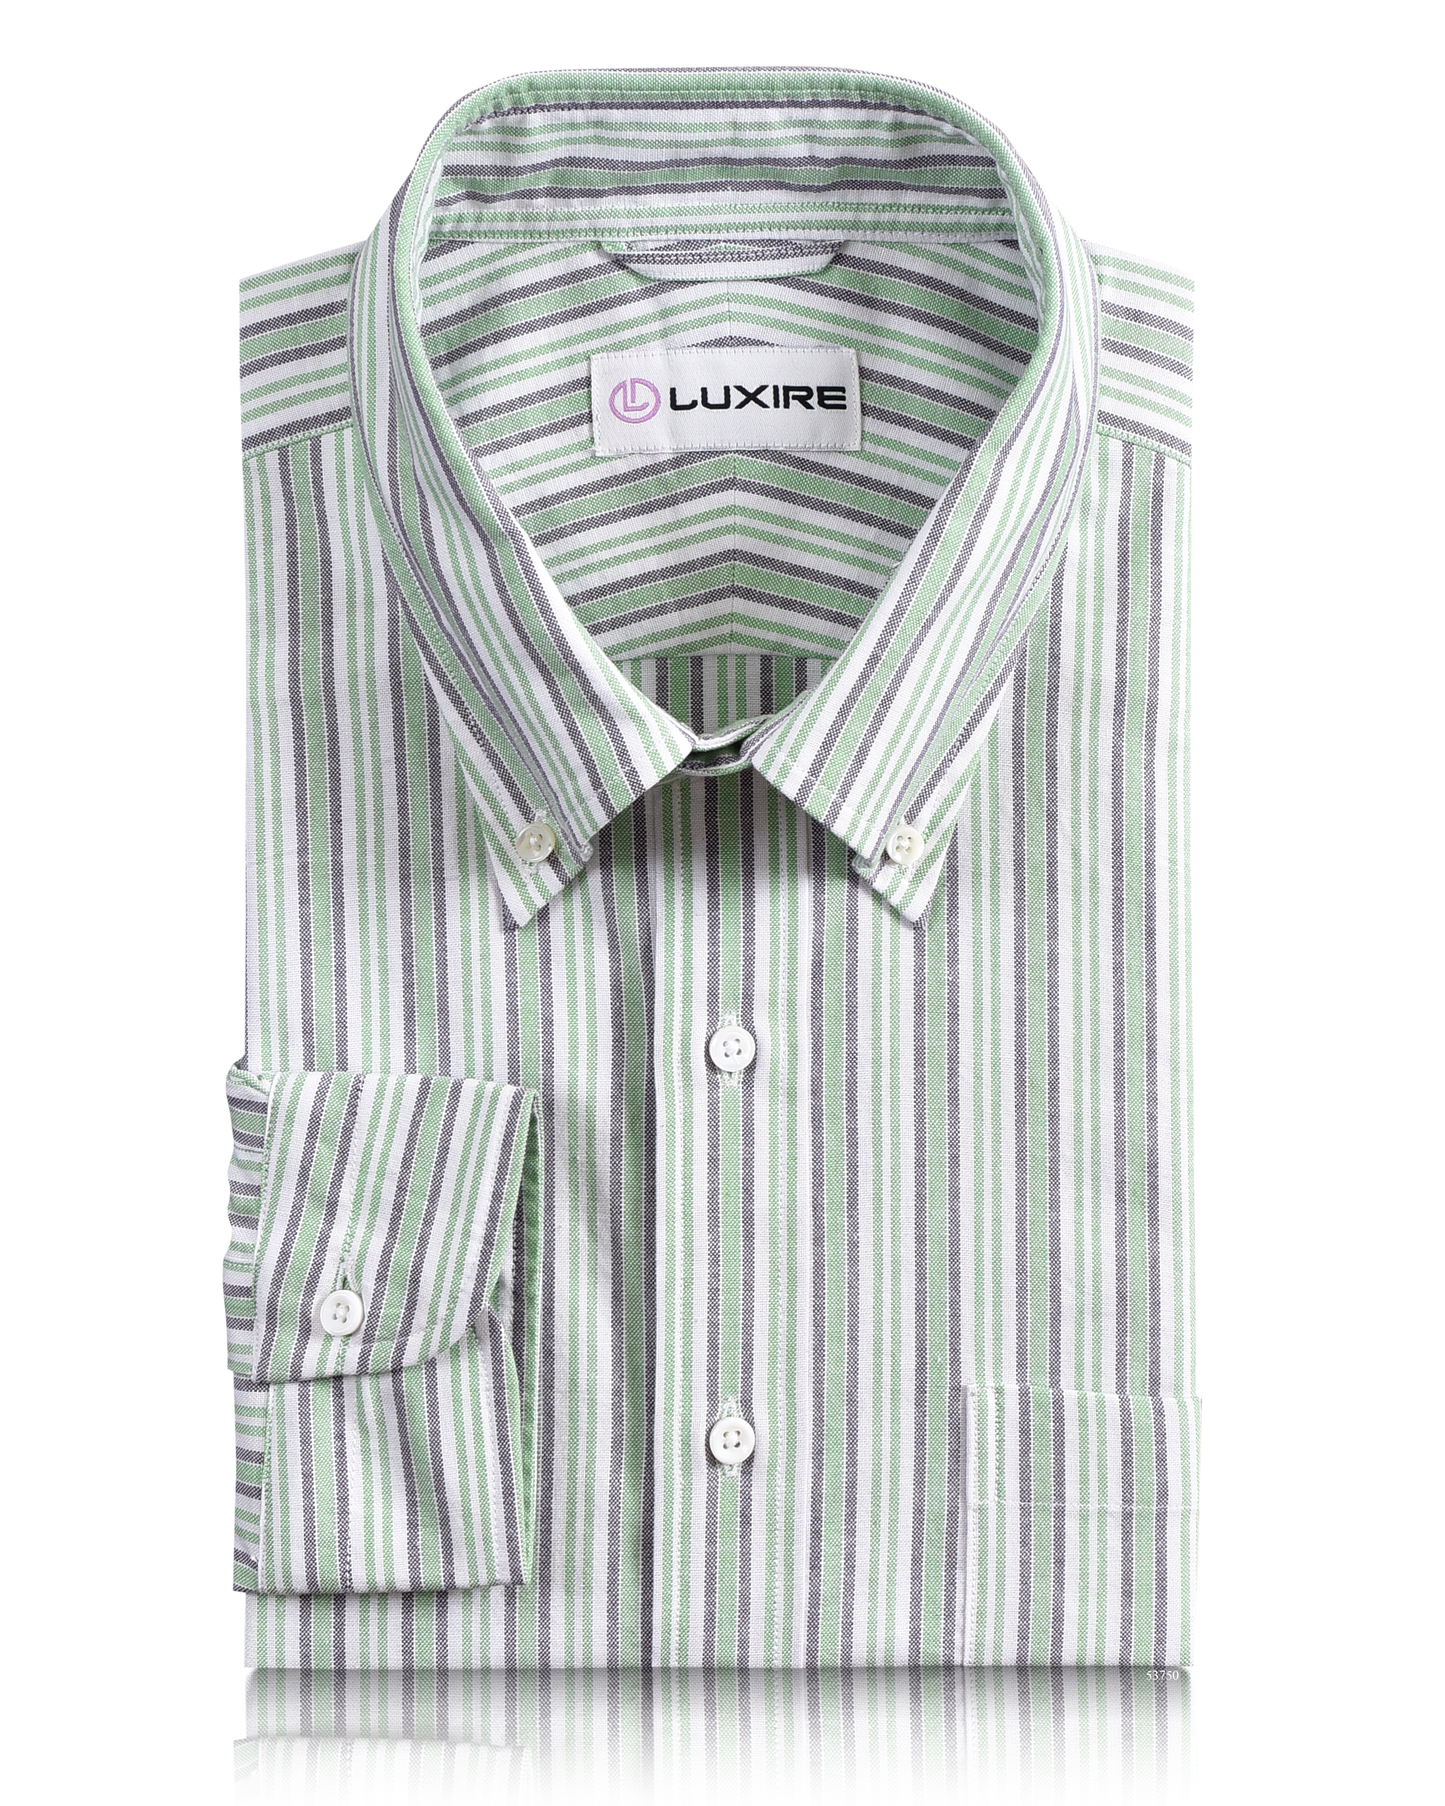 Front of the custom oxford shirt for men by Luxire in shades of green